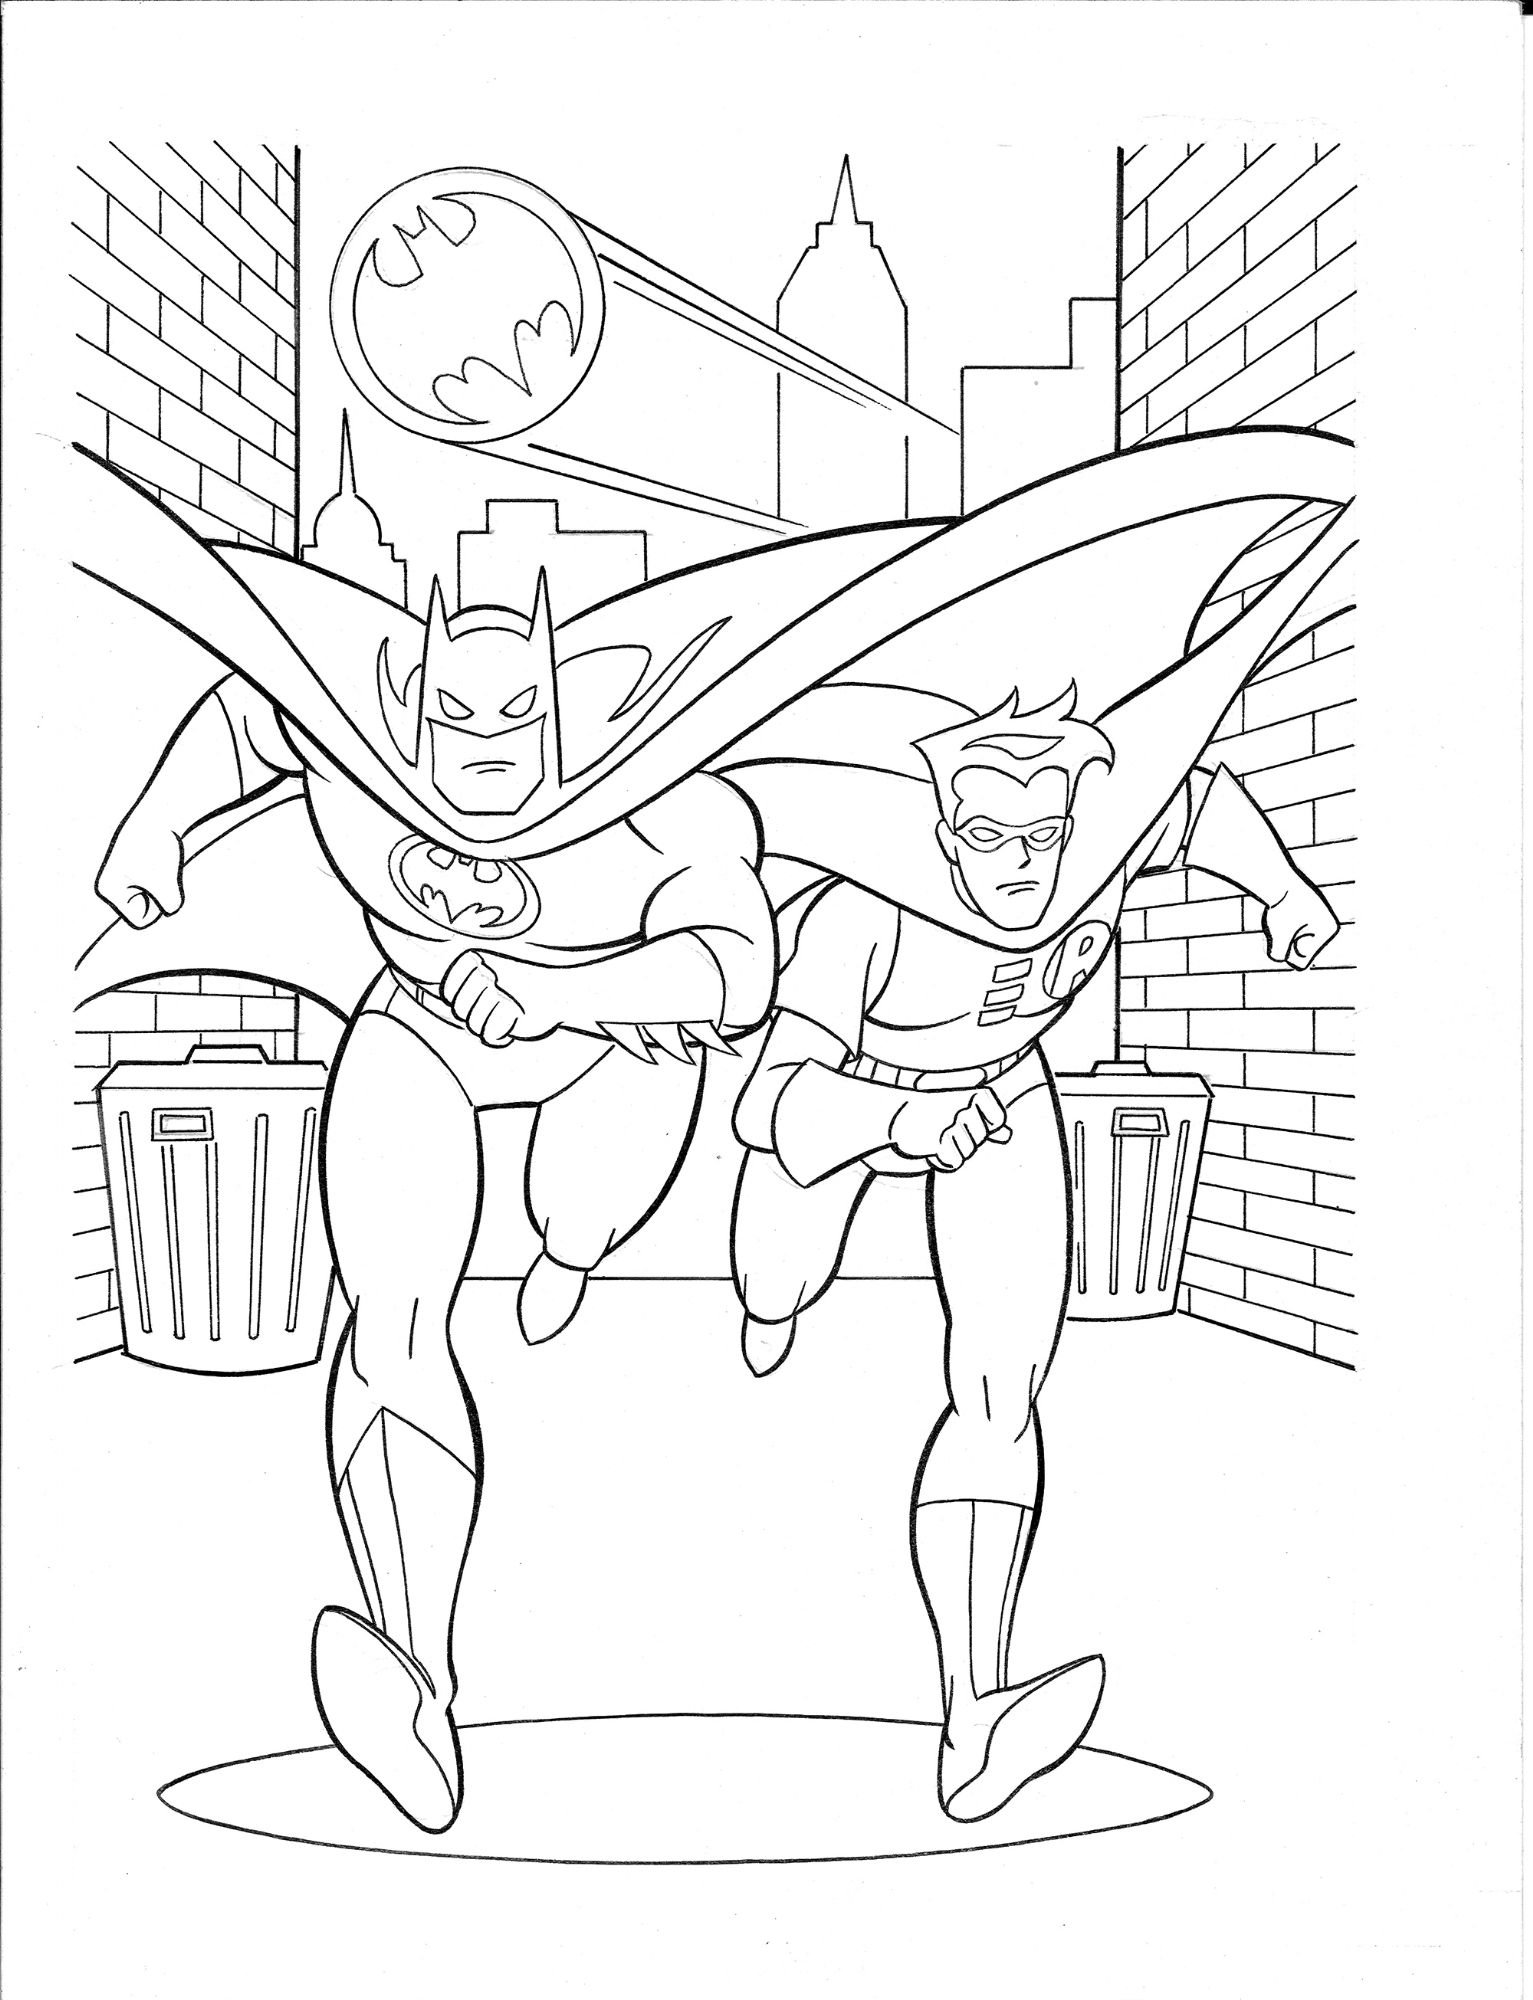 Batman: The Animated Series-Coloring Book-Mike Parobeck 1993, in Don  Emery's 3H Comic Art Gallery Room